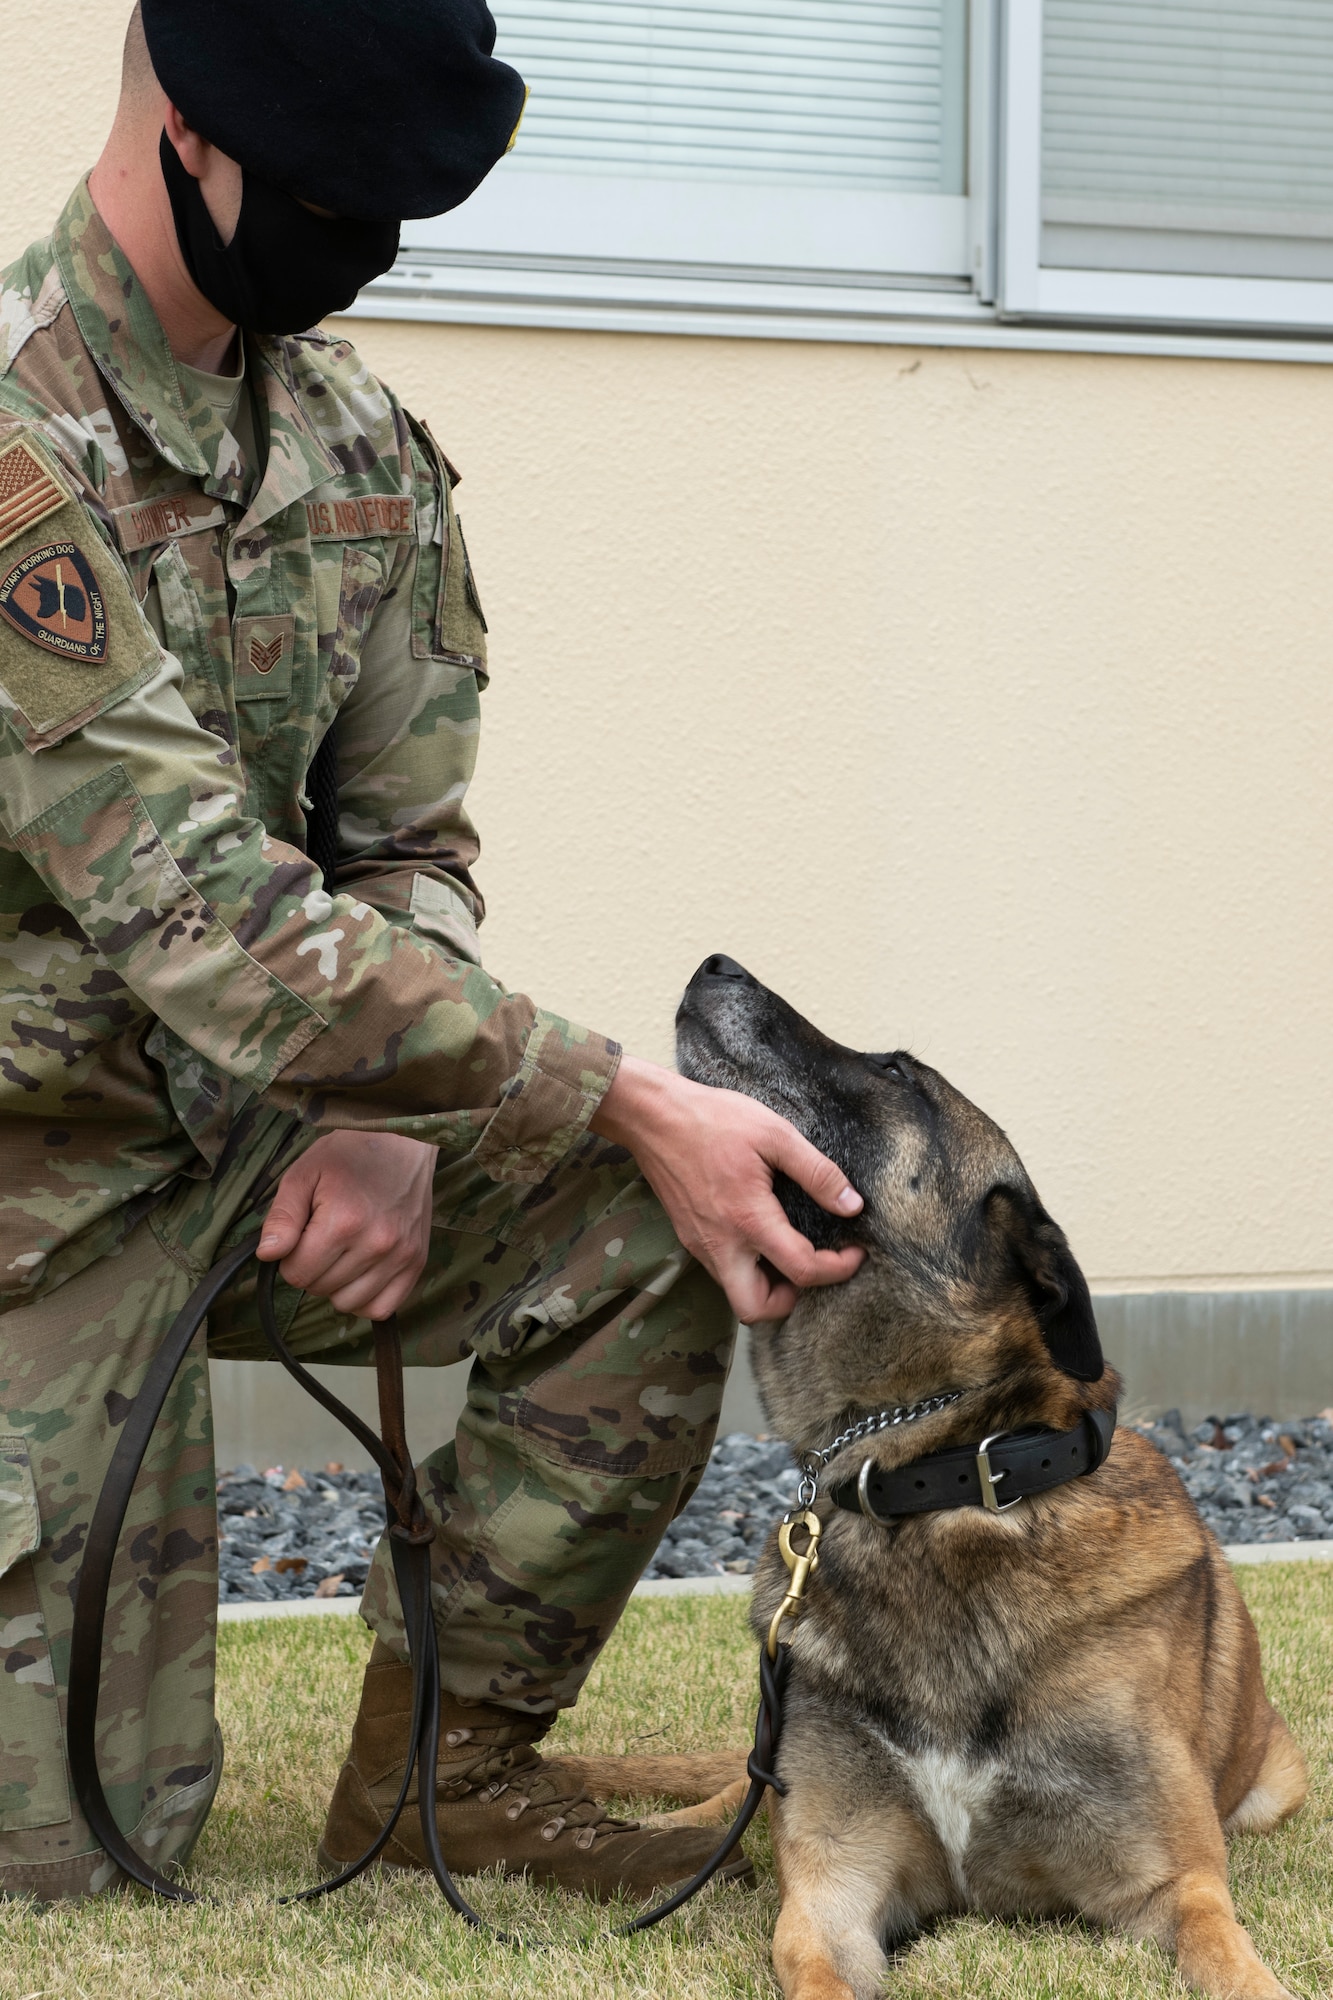 Staff Sgt. Colin Schweir, 374th Security Forces Squadron military working dog handler, pets MWD Edy at the “Day in the Life” event during National Police Week at Yokota Air Base, Japan, May 11, 2021.  Security forces brought out two MWDs to provide the base insight on what the SFS does and how they train. (U.S. Air Force photo by Staff Sgt. Joshua Edwards)